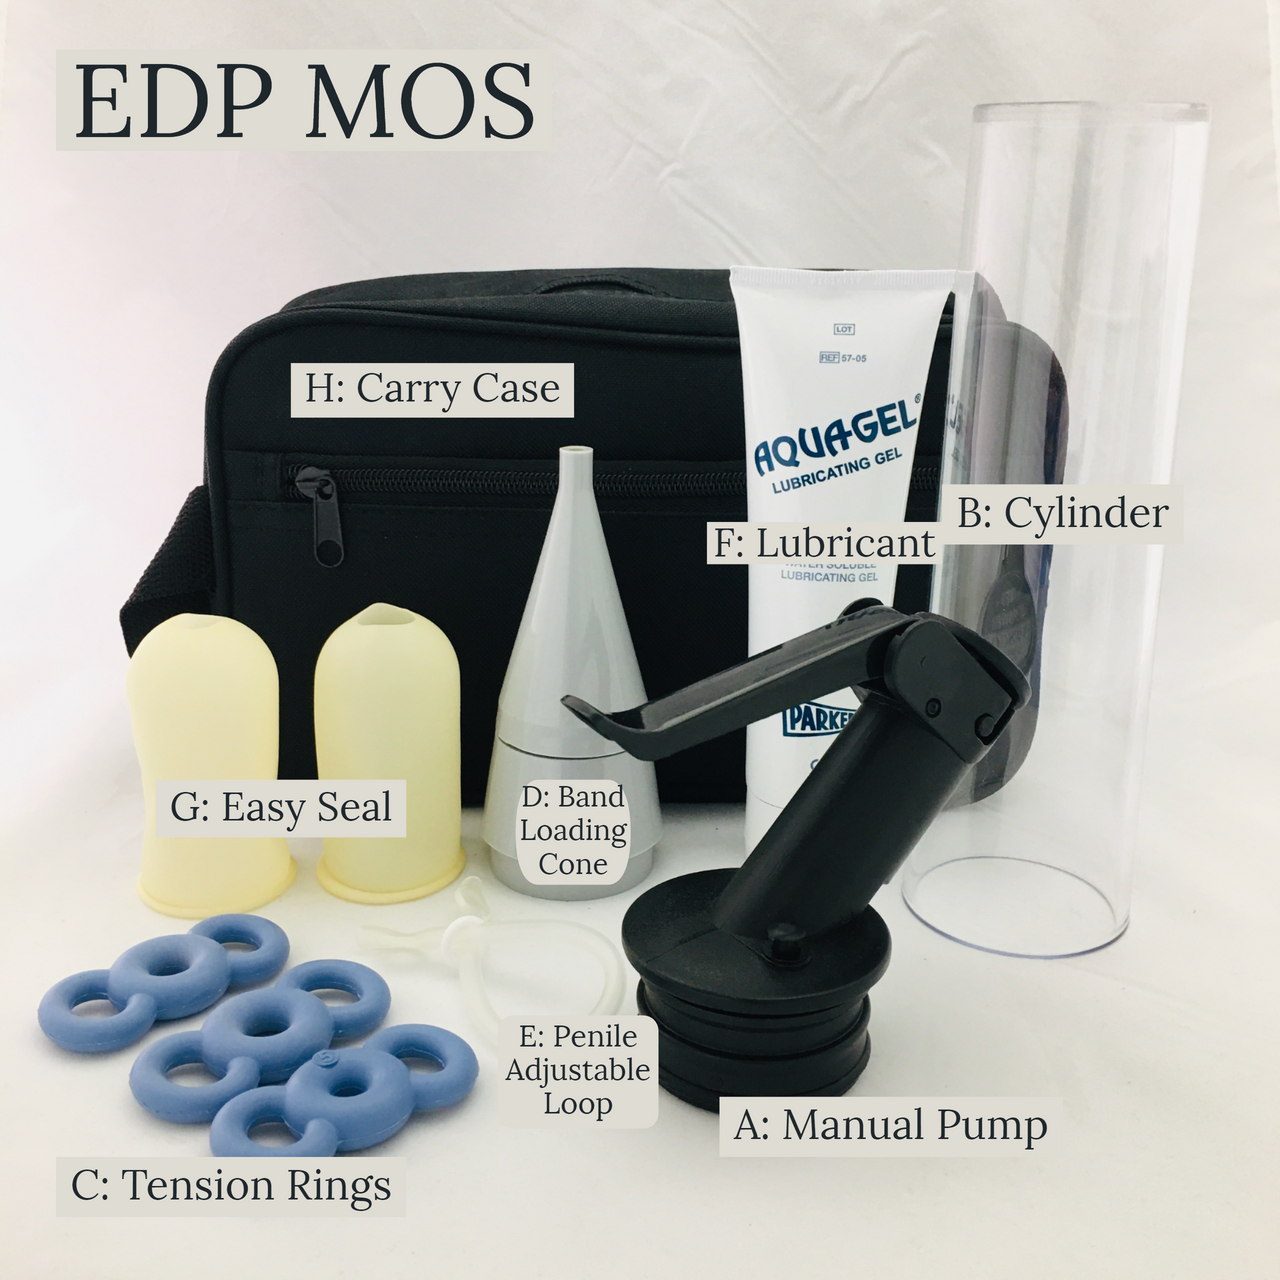 Maintain Loop for ED and PE  Penis Pump Accessories – shopping